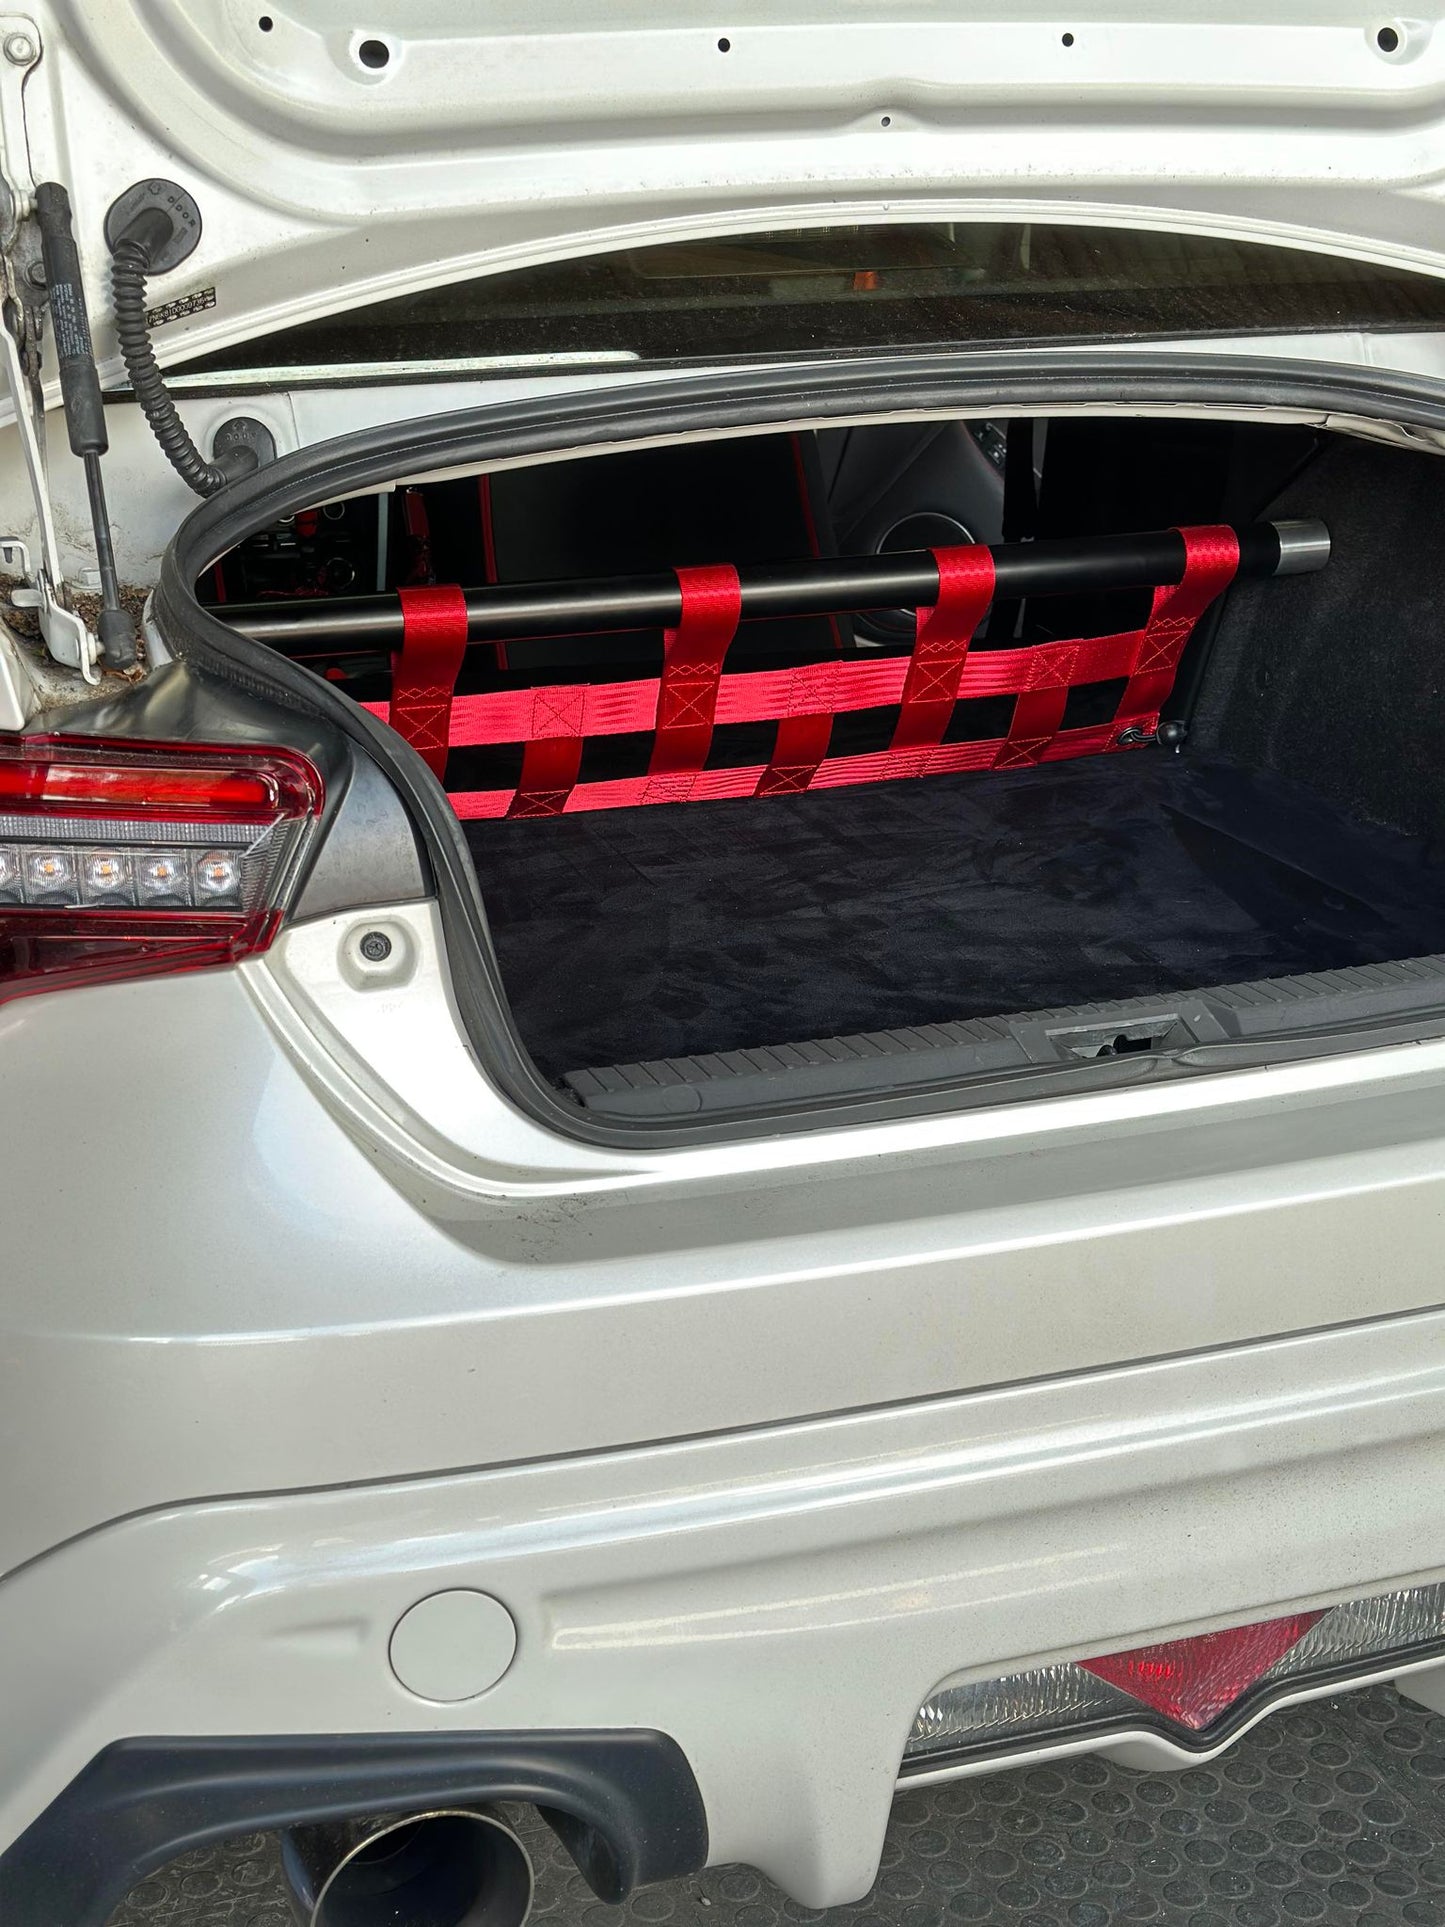 Toyota GT86 Complete Clubsport Rear Seat Delete Kit